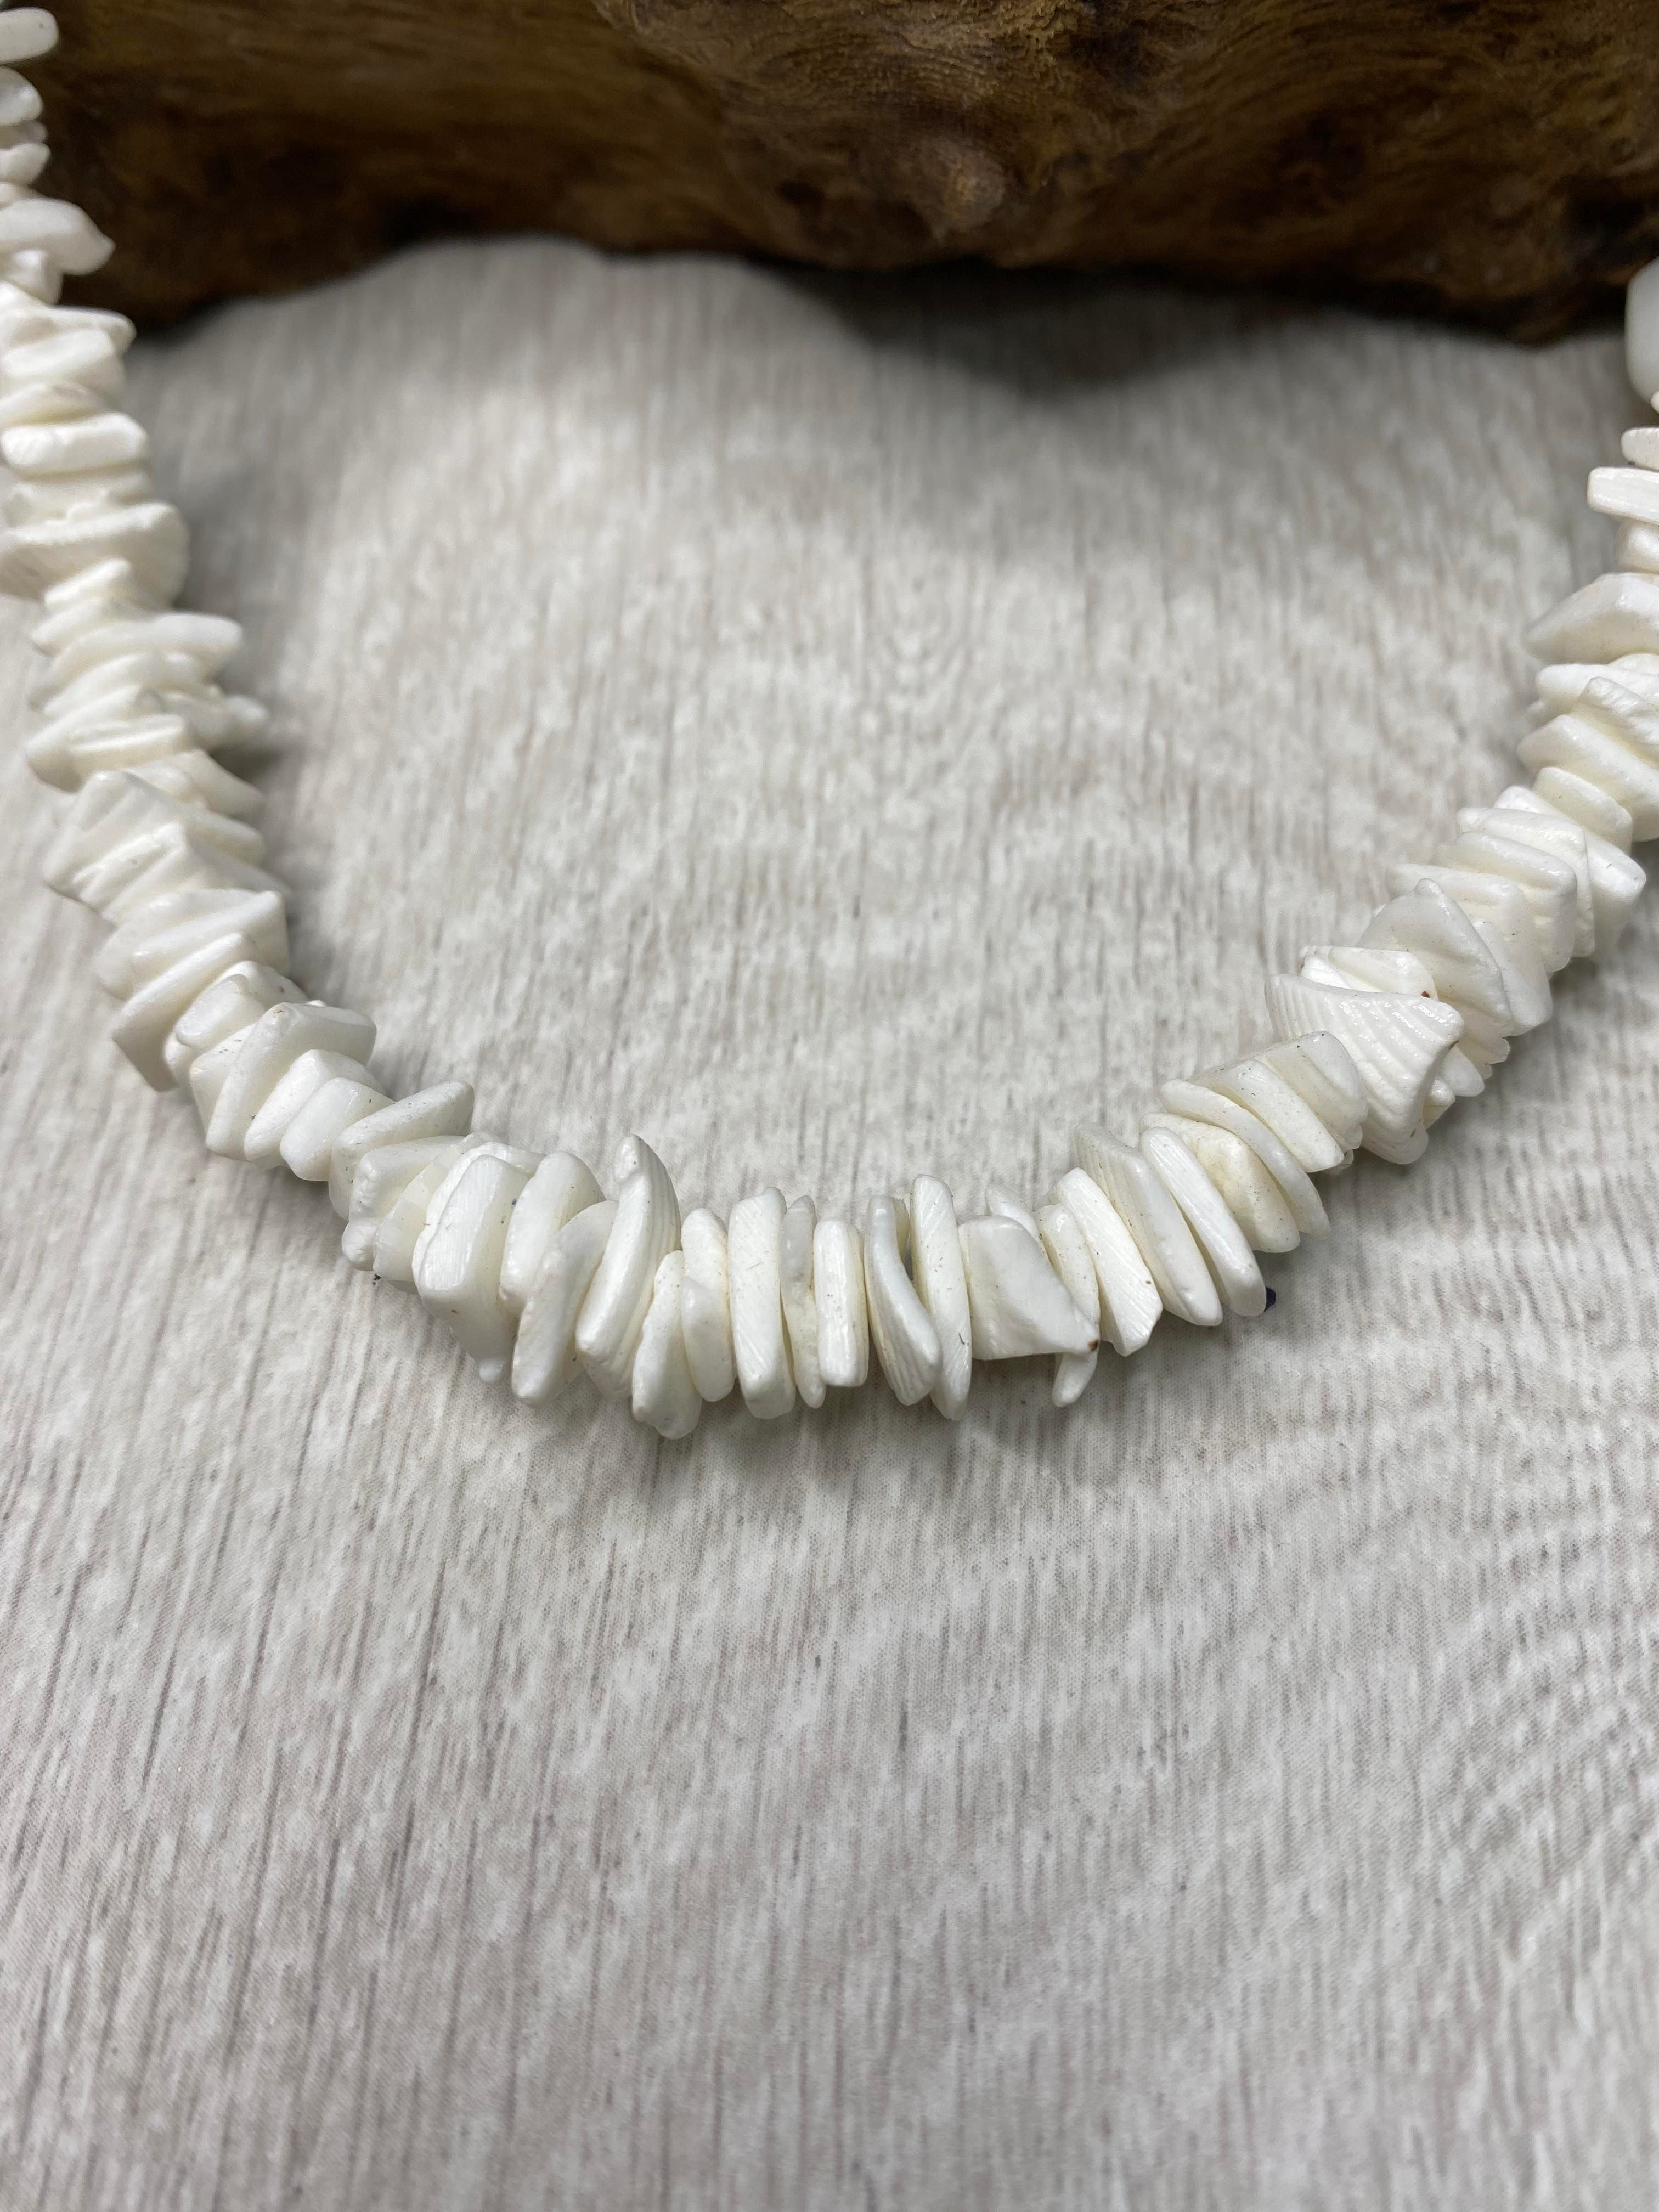 FASACCO Surfer Necklace for Men Puka Shell Necklace Men Sea Shell Necklace  Beach Necklace Pookah Shells Choker Necklace 14 Inch | Amazon.com